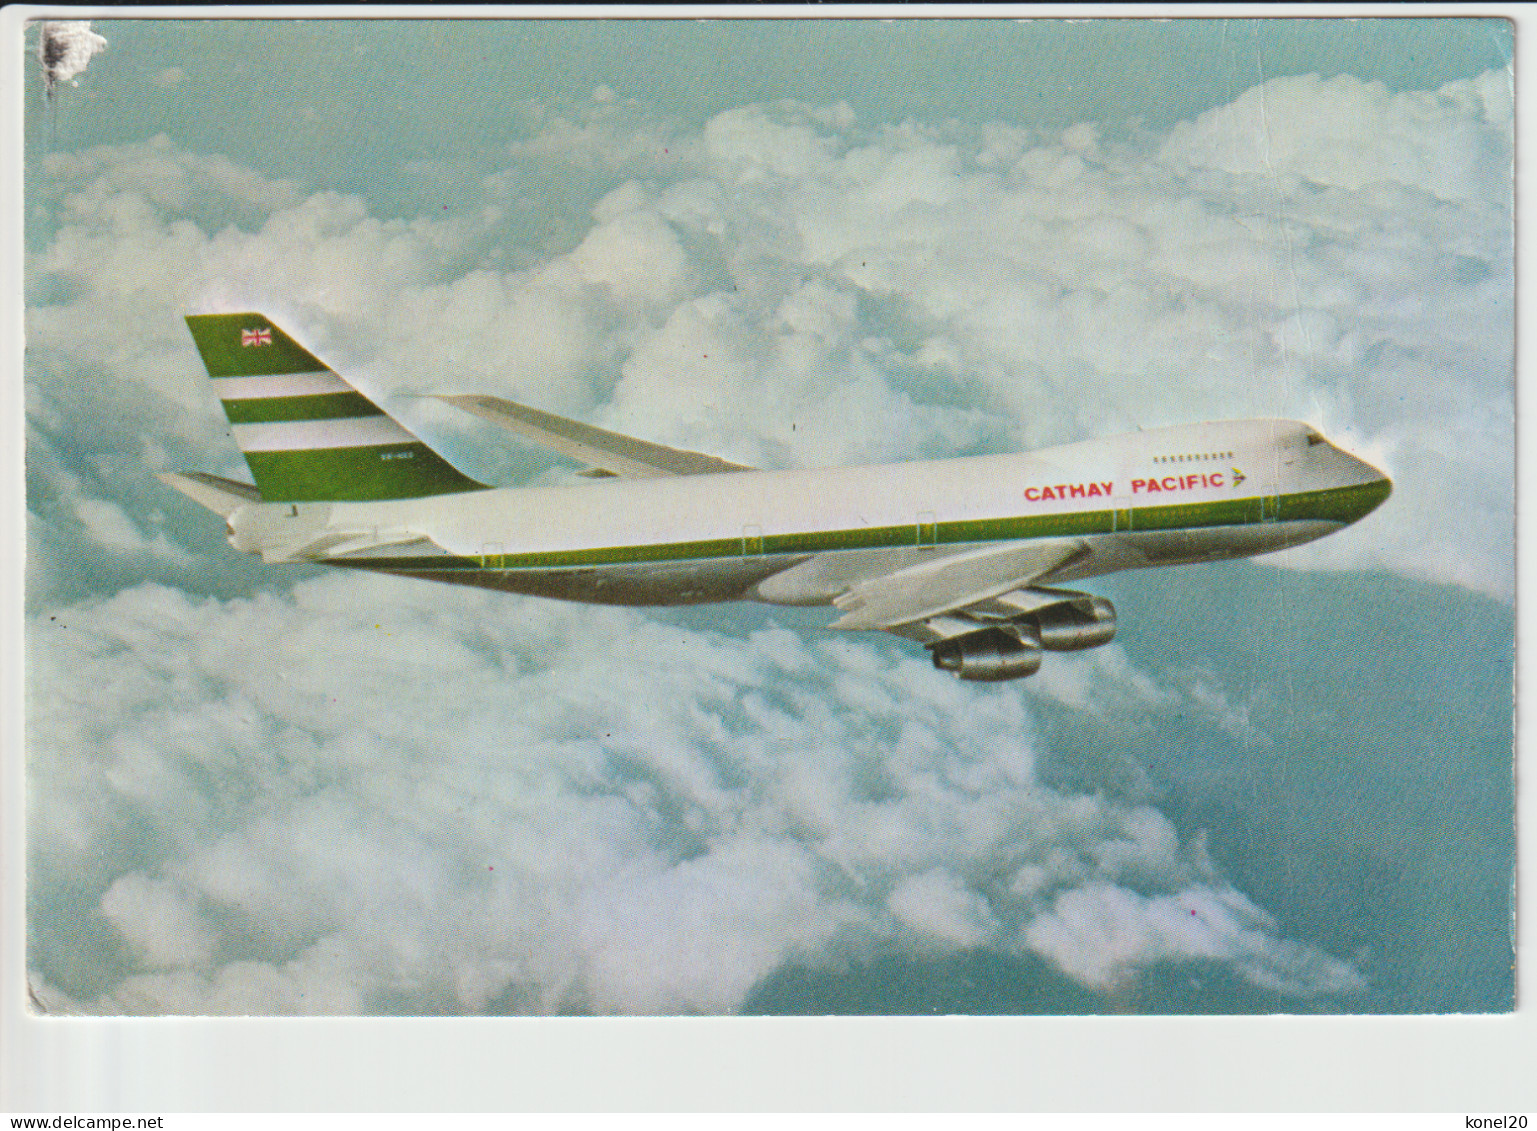 Vintage Pc Cathay Pacific Hongkong Boeing 747 Aircraft - 1919-1938: Fra Le Due Guerre